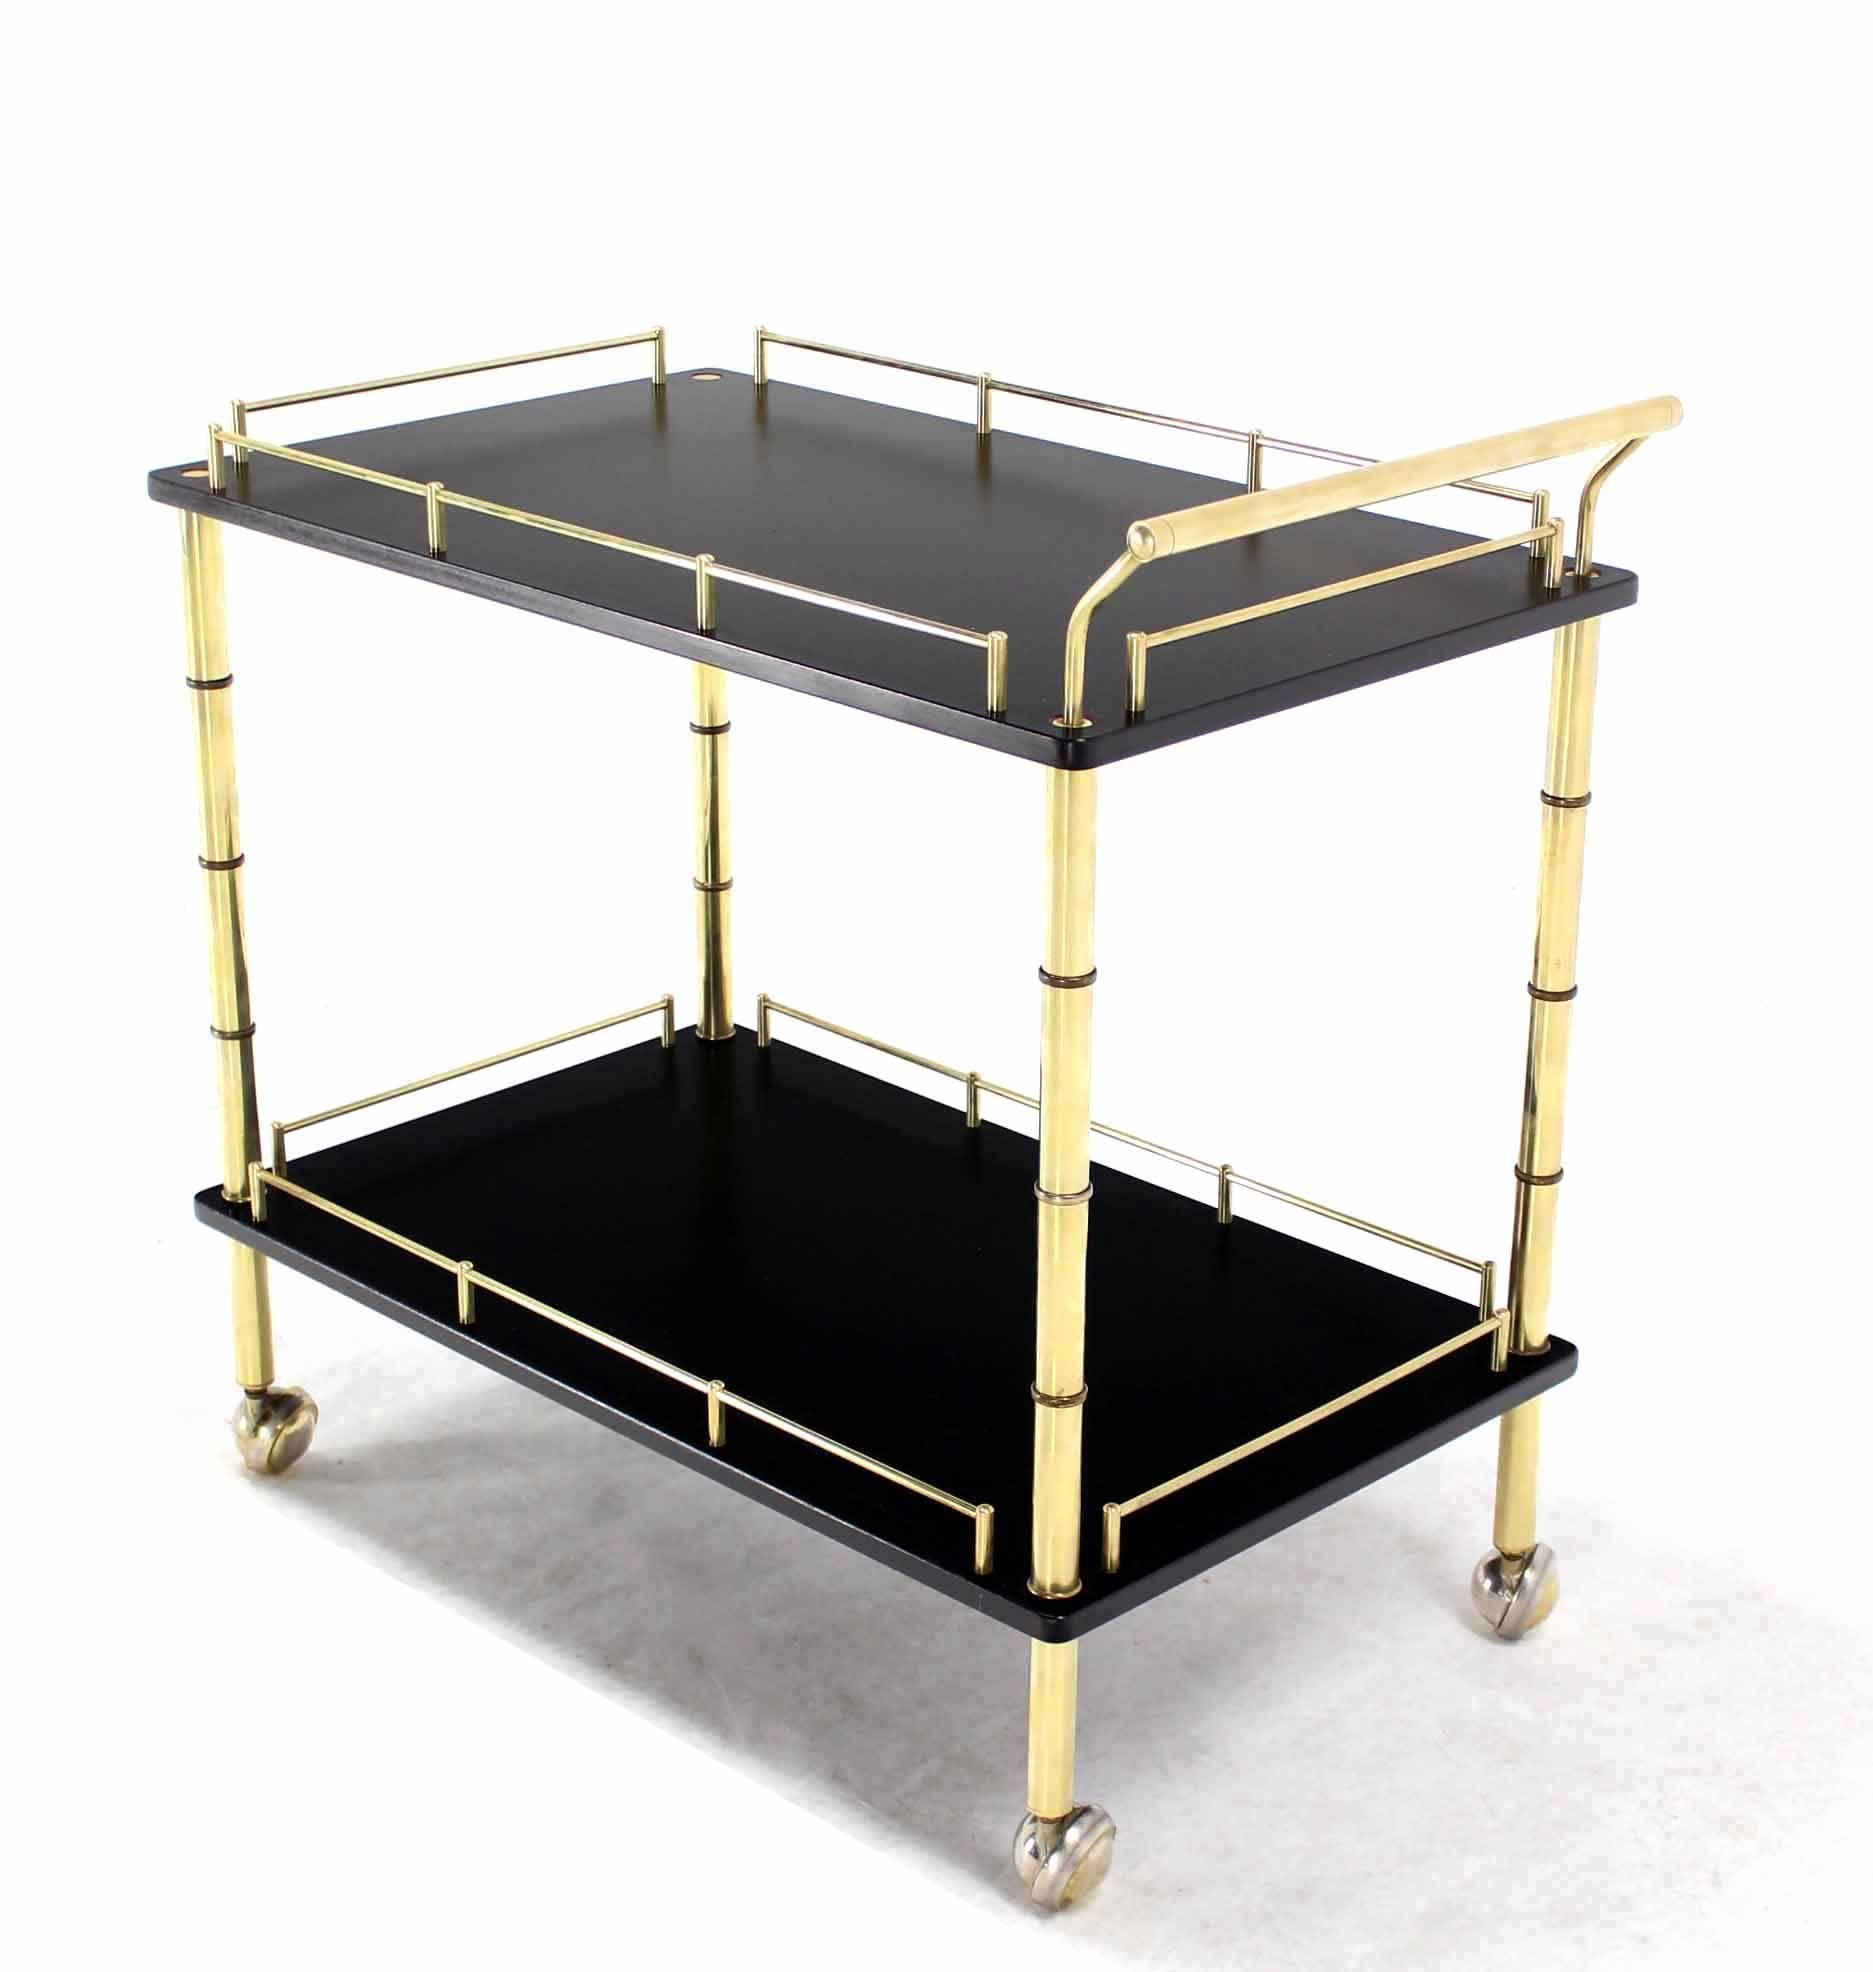 Mid-Century Modern faux bamboo brass rolling bar cart. Beautiful craftsmanship and design detail piece.







In style of Maison Bagues